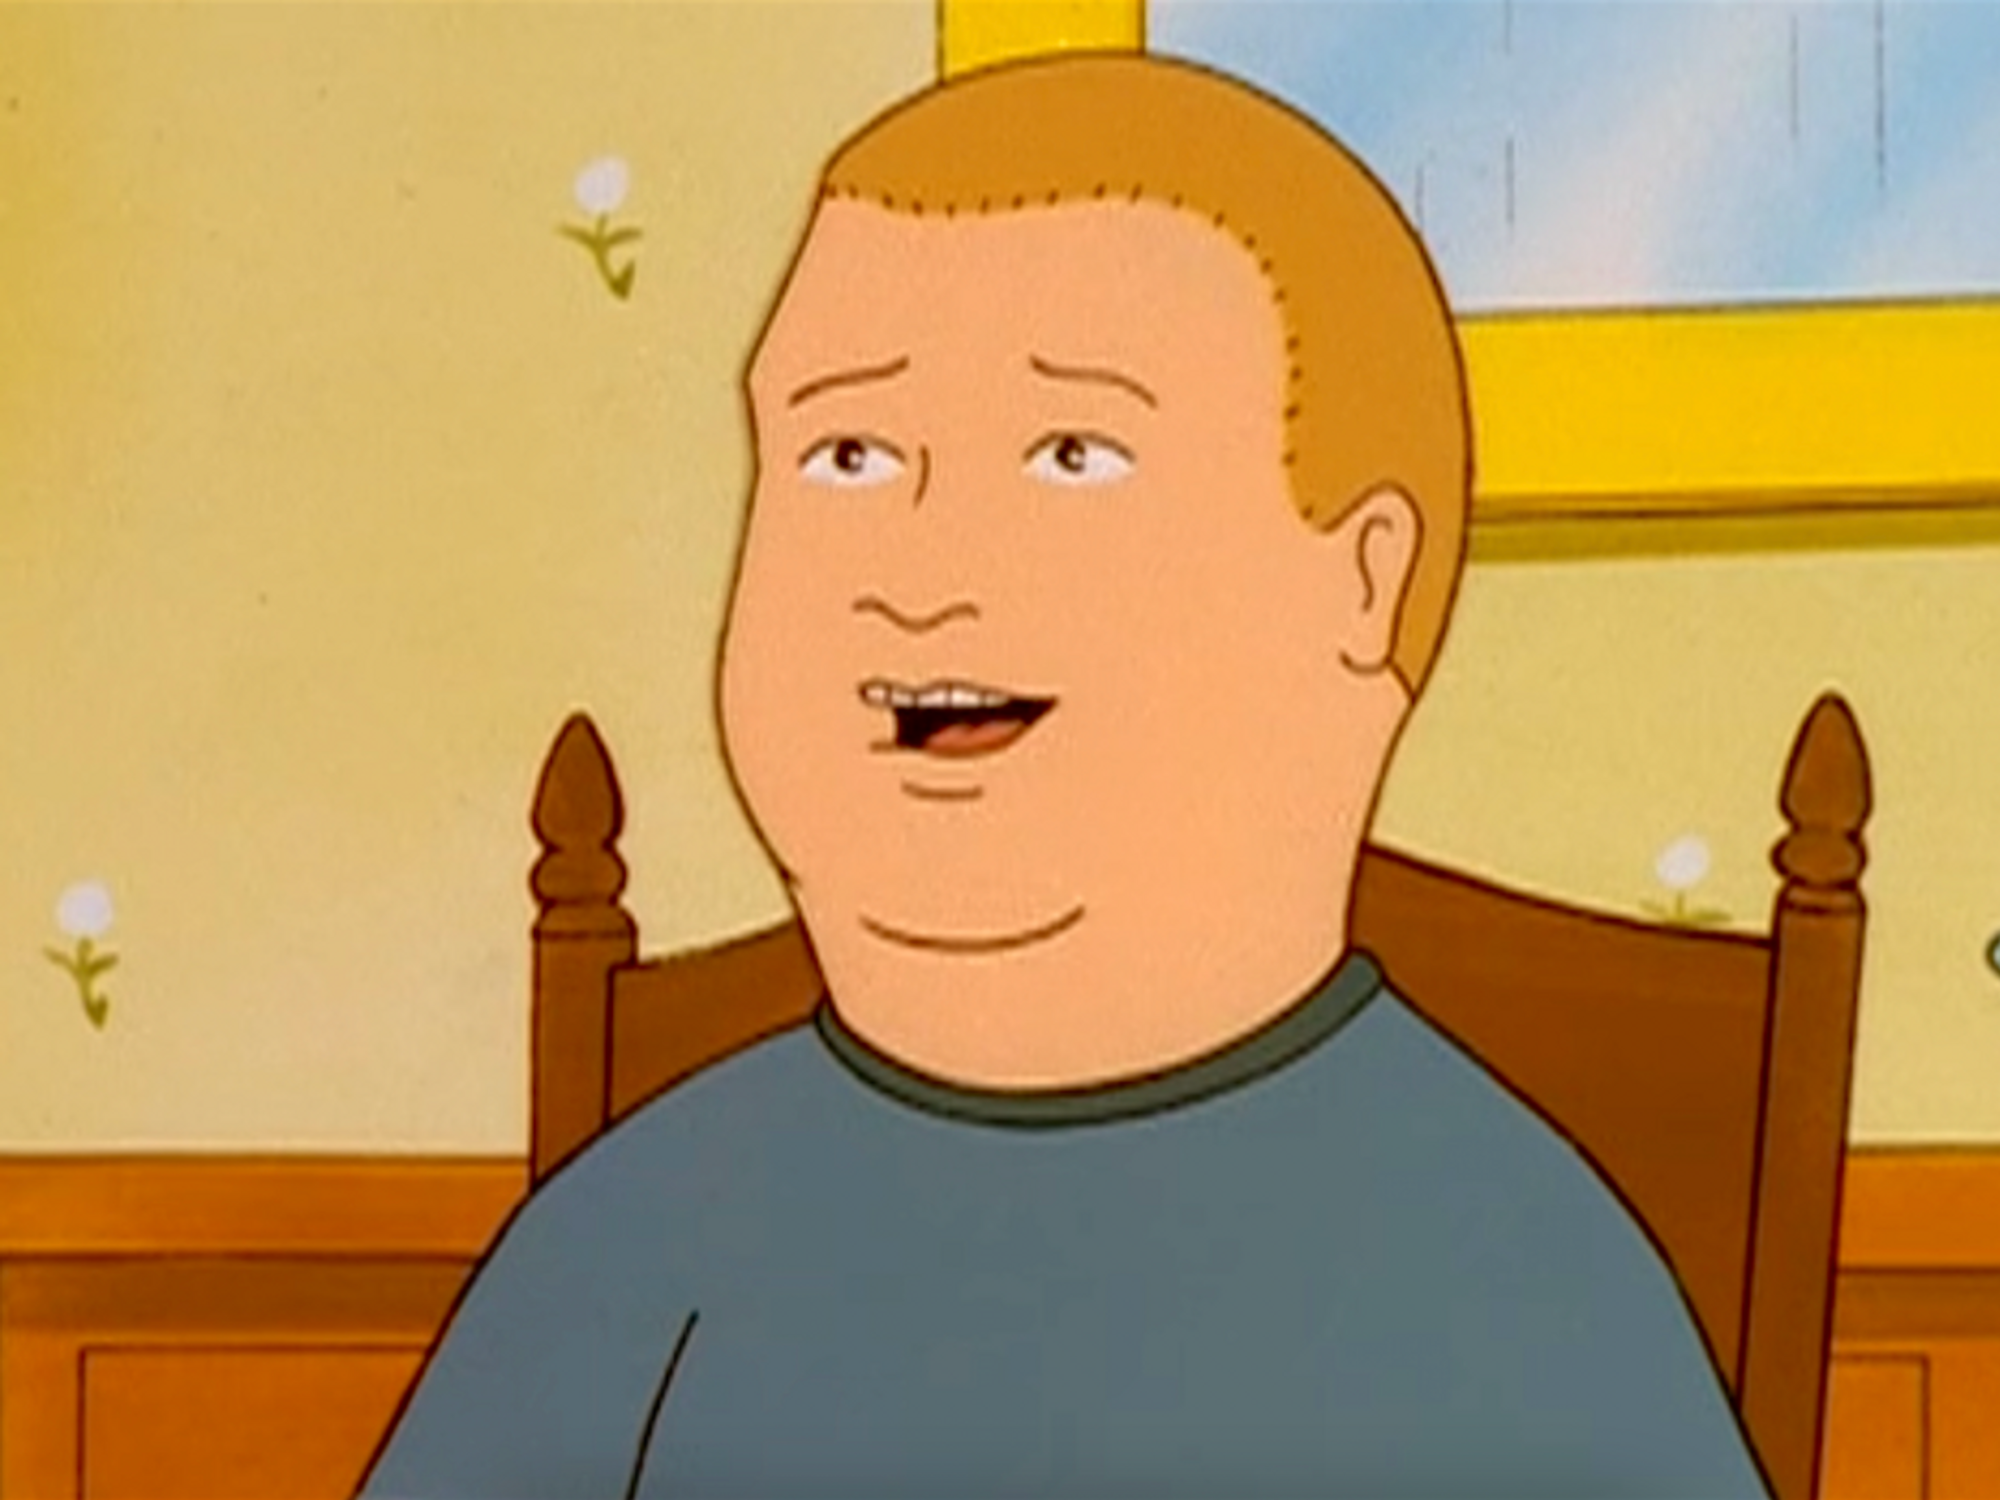 A 'King of the Hill' reboot is coming from the show's original creators